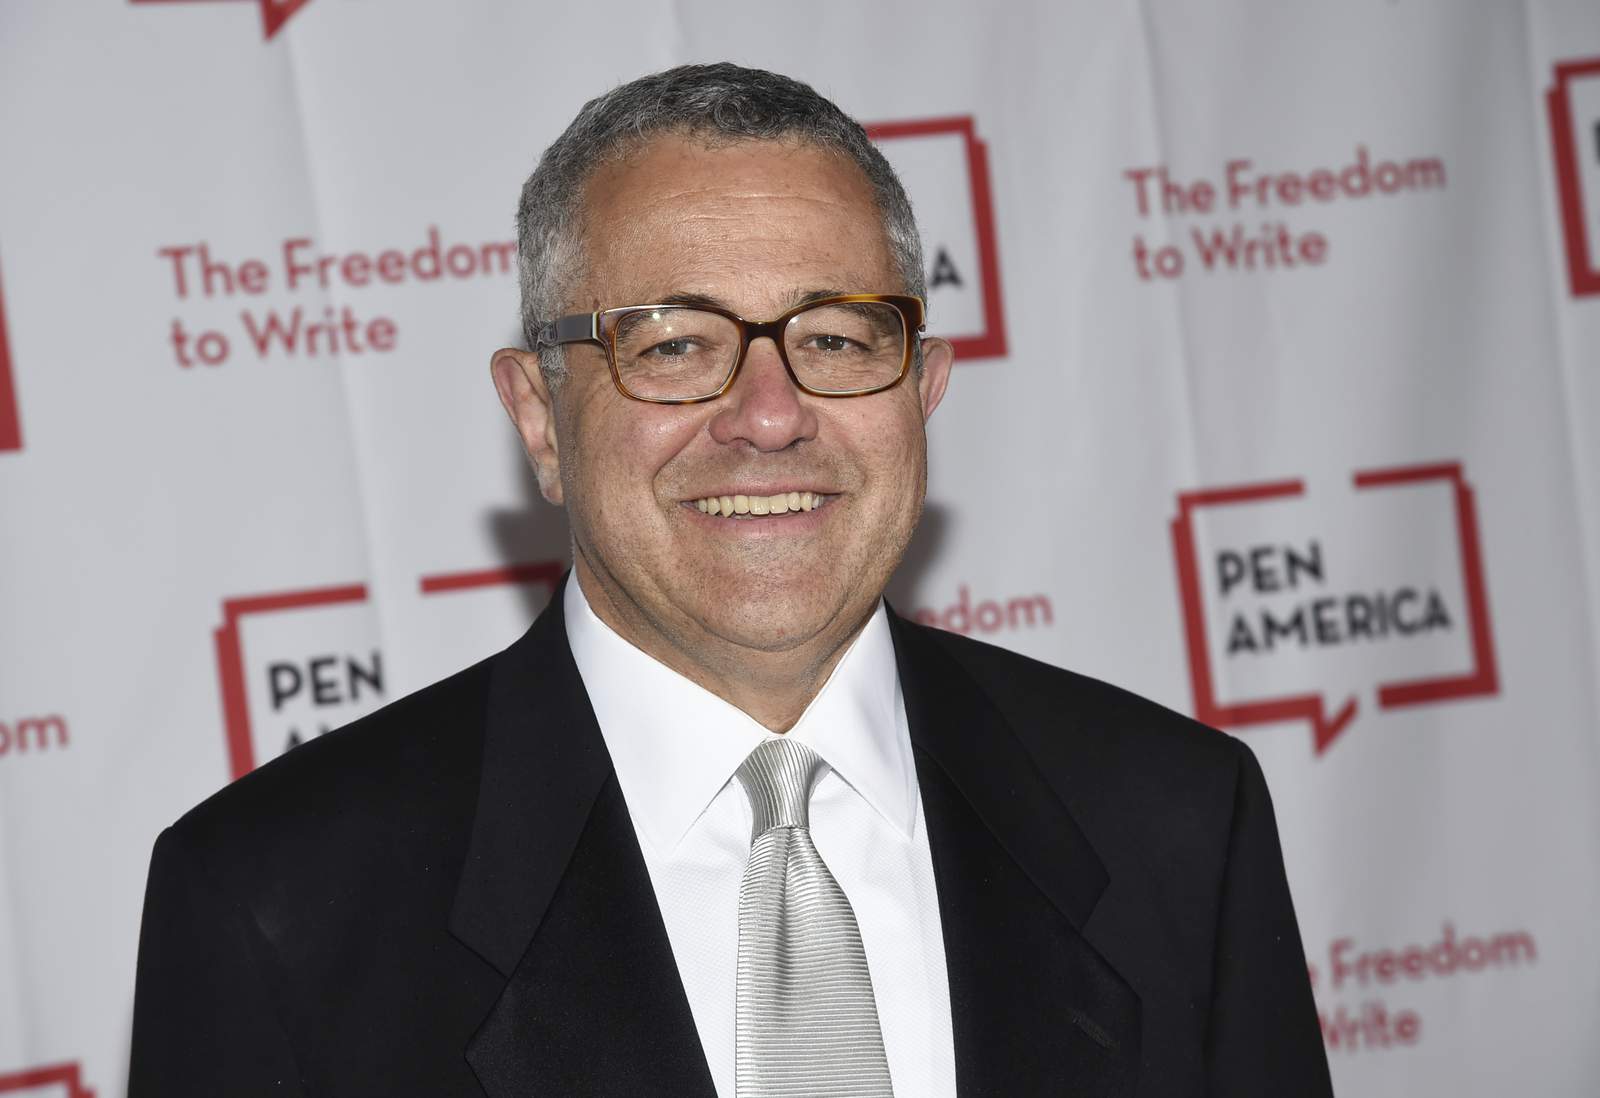 Toobin suspended by the New Yorker, steps away from CNN